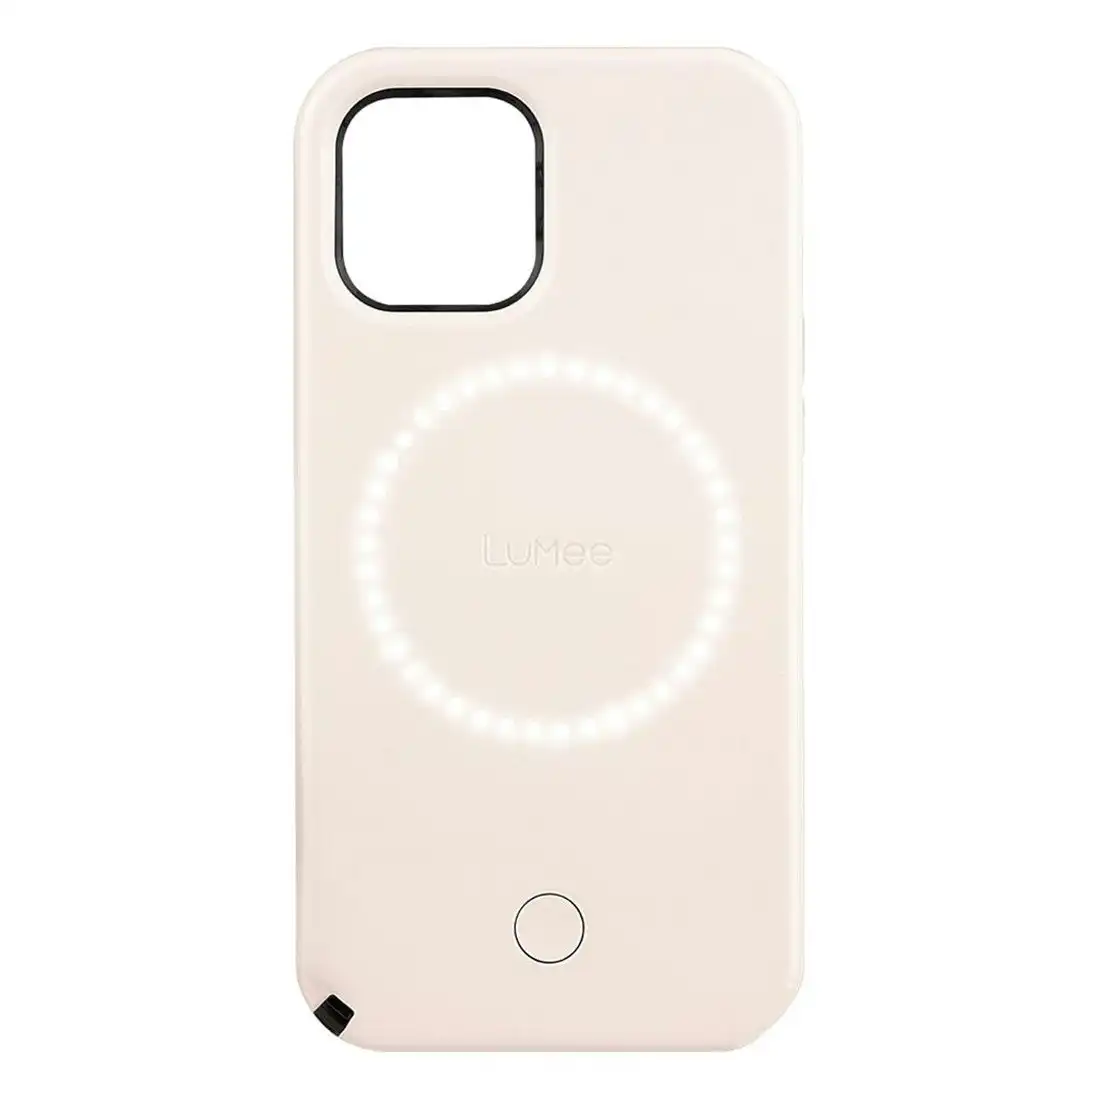 Case-Mate LuMee Halo Case Cover For Apple iPhone 12 Mini - Millennial Pink